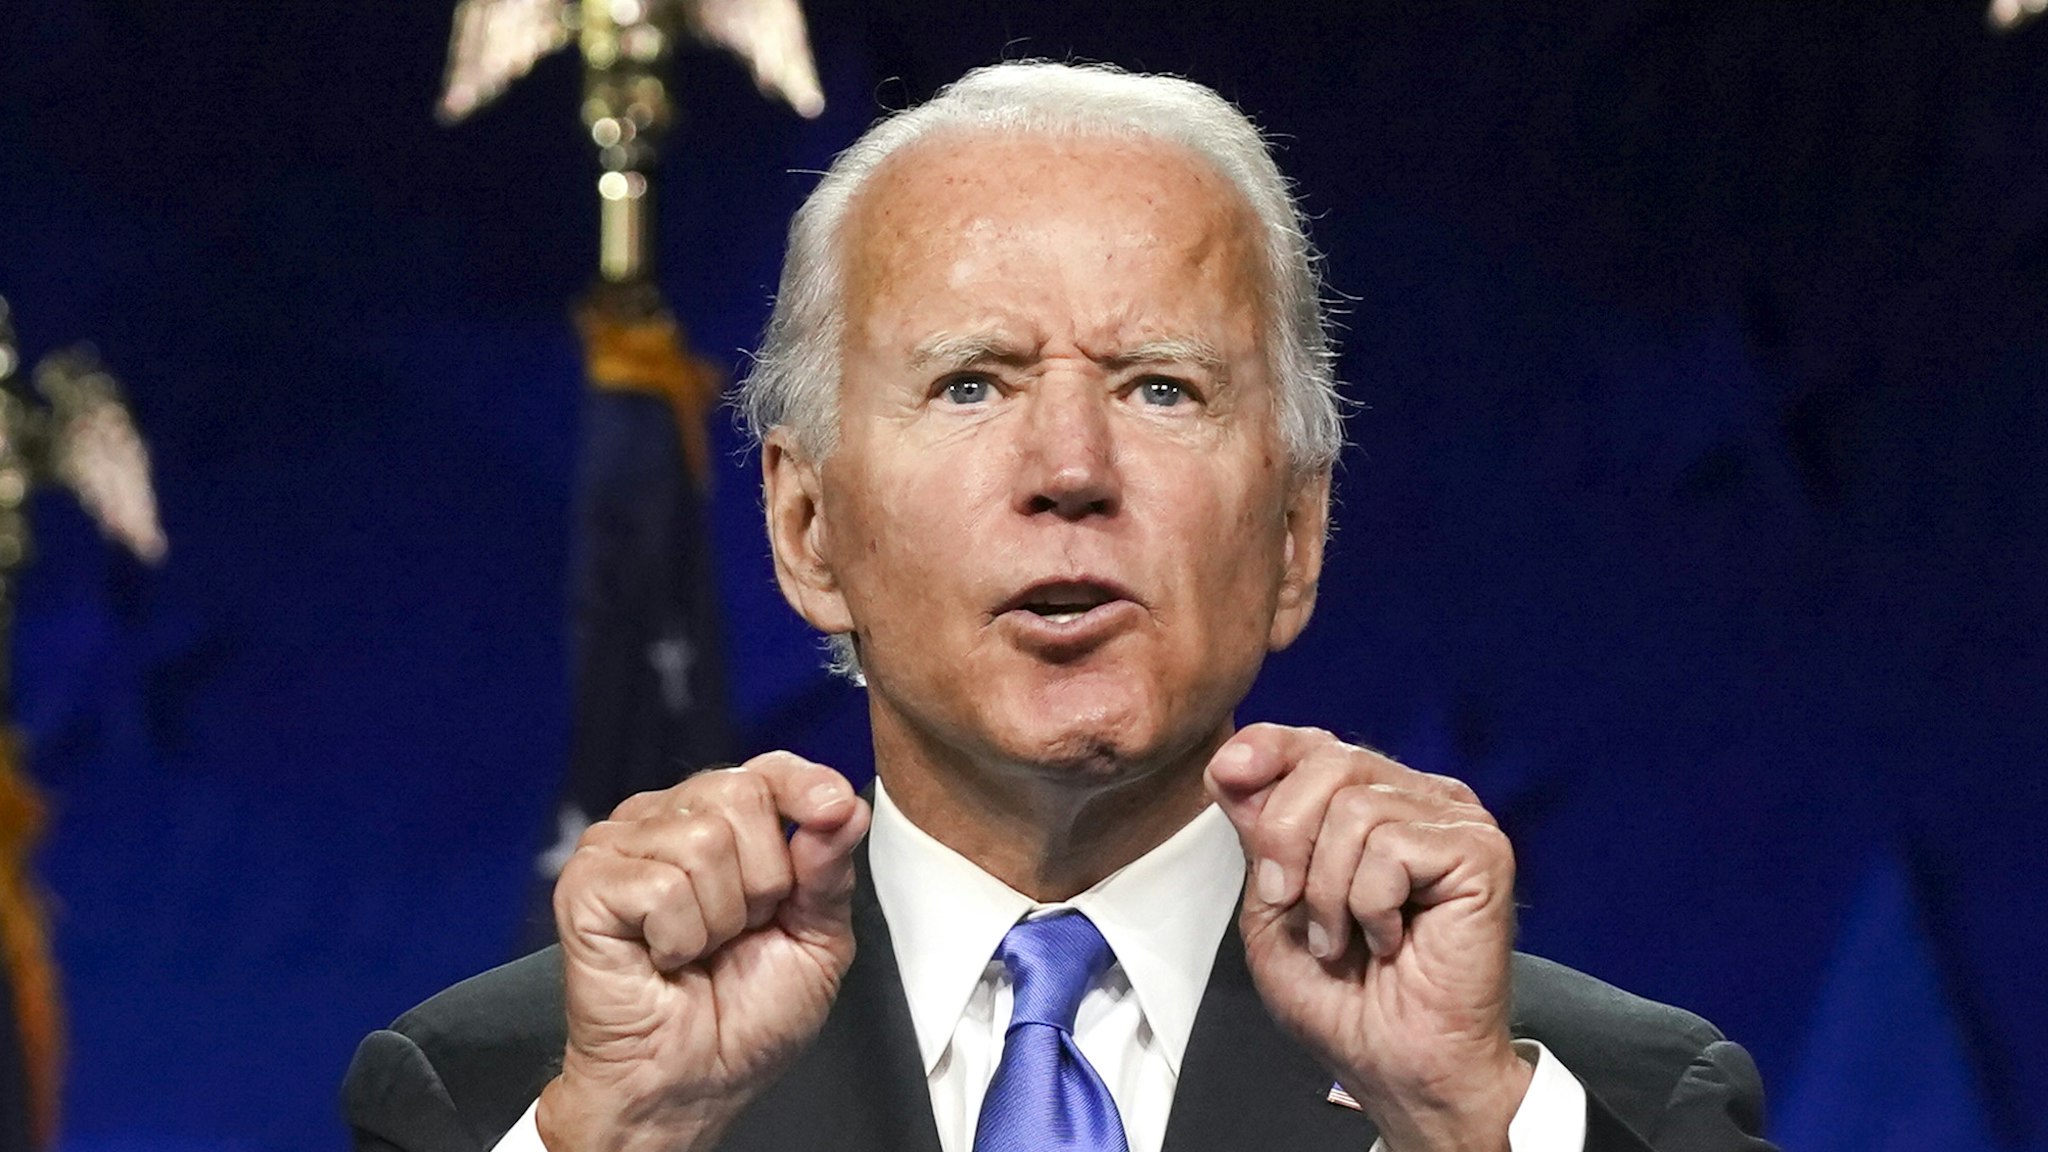 Former Vice President Joe Biden, Democratic presidential nominee, speaks during the Democratic National Convention at the Chase Center in Wilmington, Delaware, U.S., on Thursday, Aug. 20, 2020. Biden accepted the Democratic nomination to challenge President Donald Trump, urging Americans in a prime-time address to vote for new national leadership that will overcome deep U.S. political divisions.